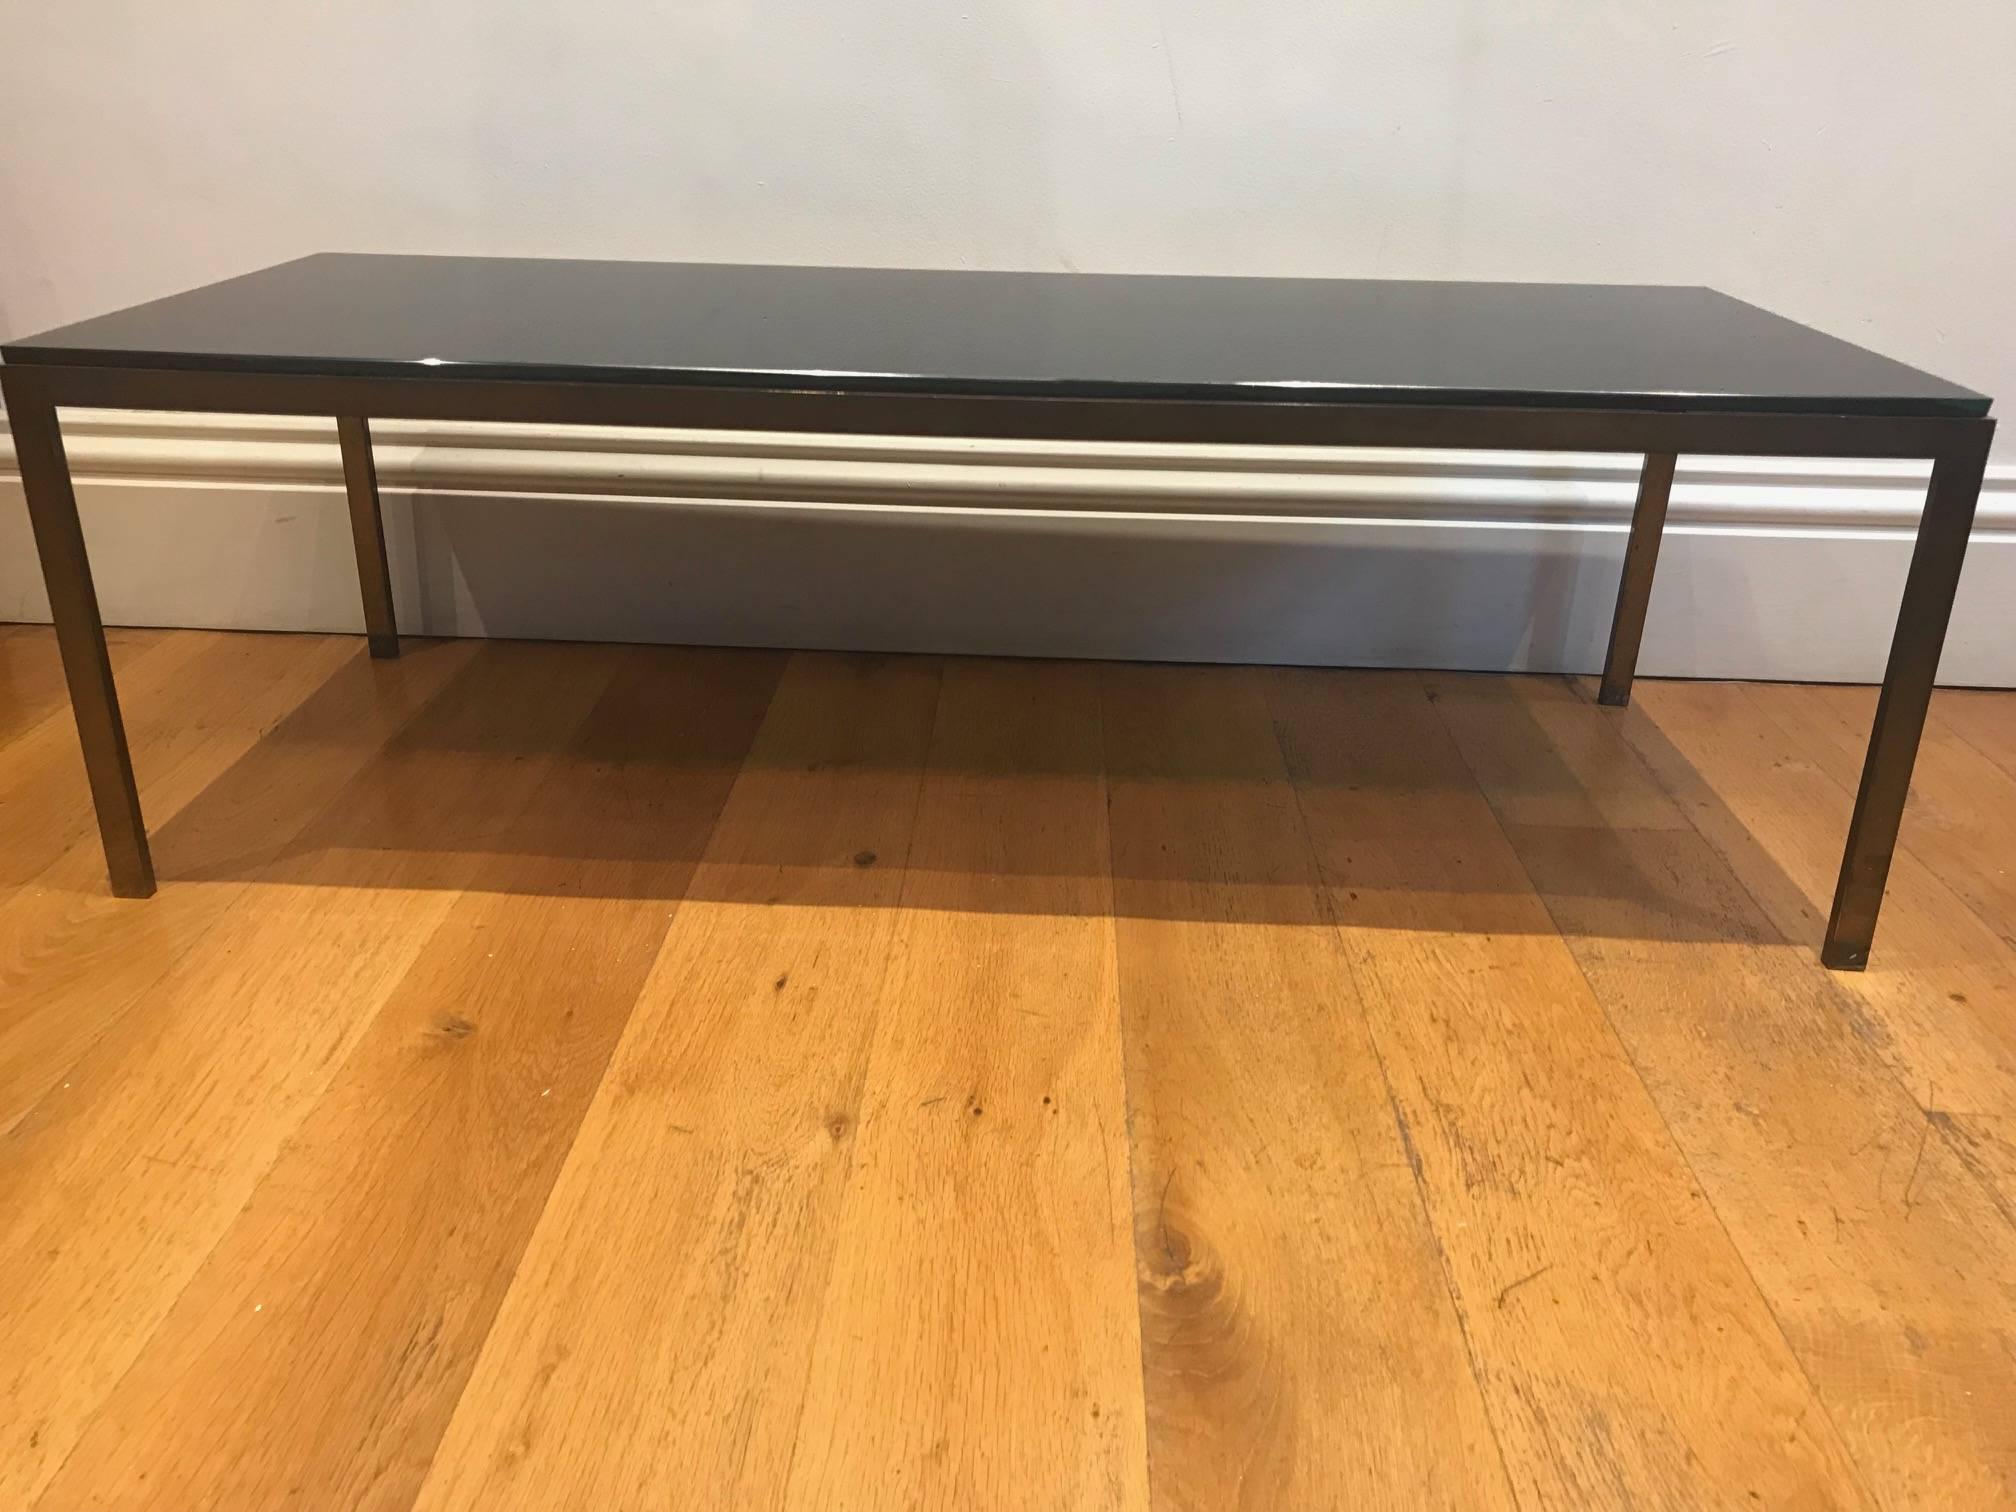 A very sleek and elegant solid bronzed metal and black glass coffee table, French, circa 1950s.